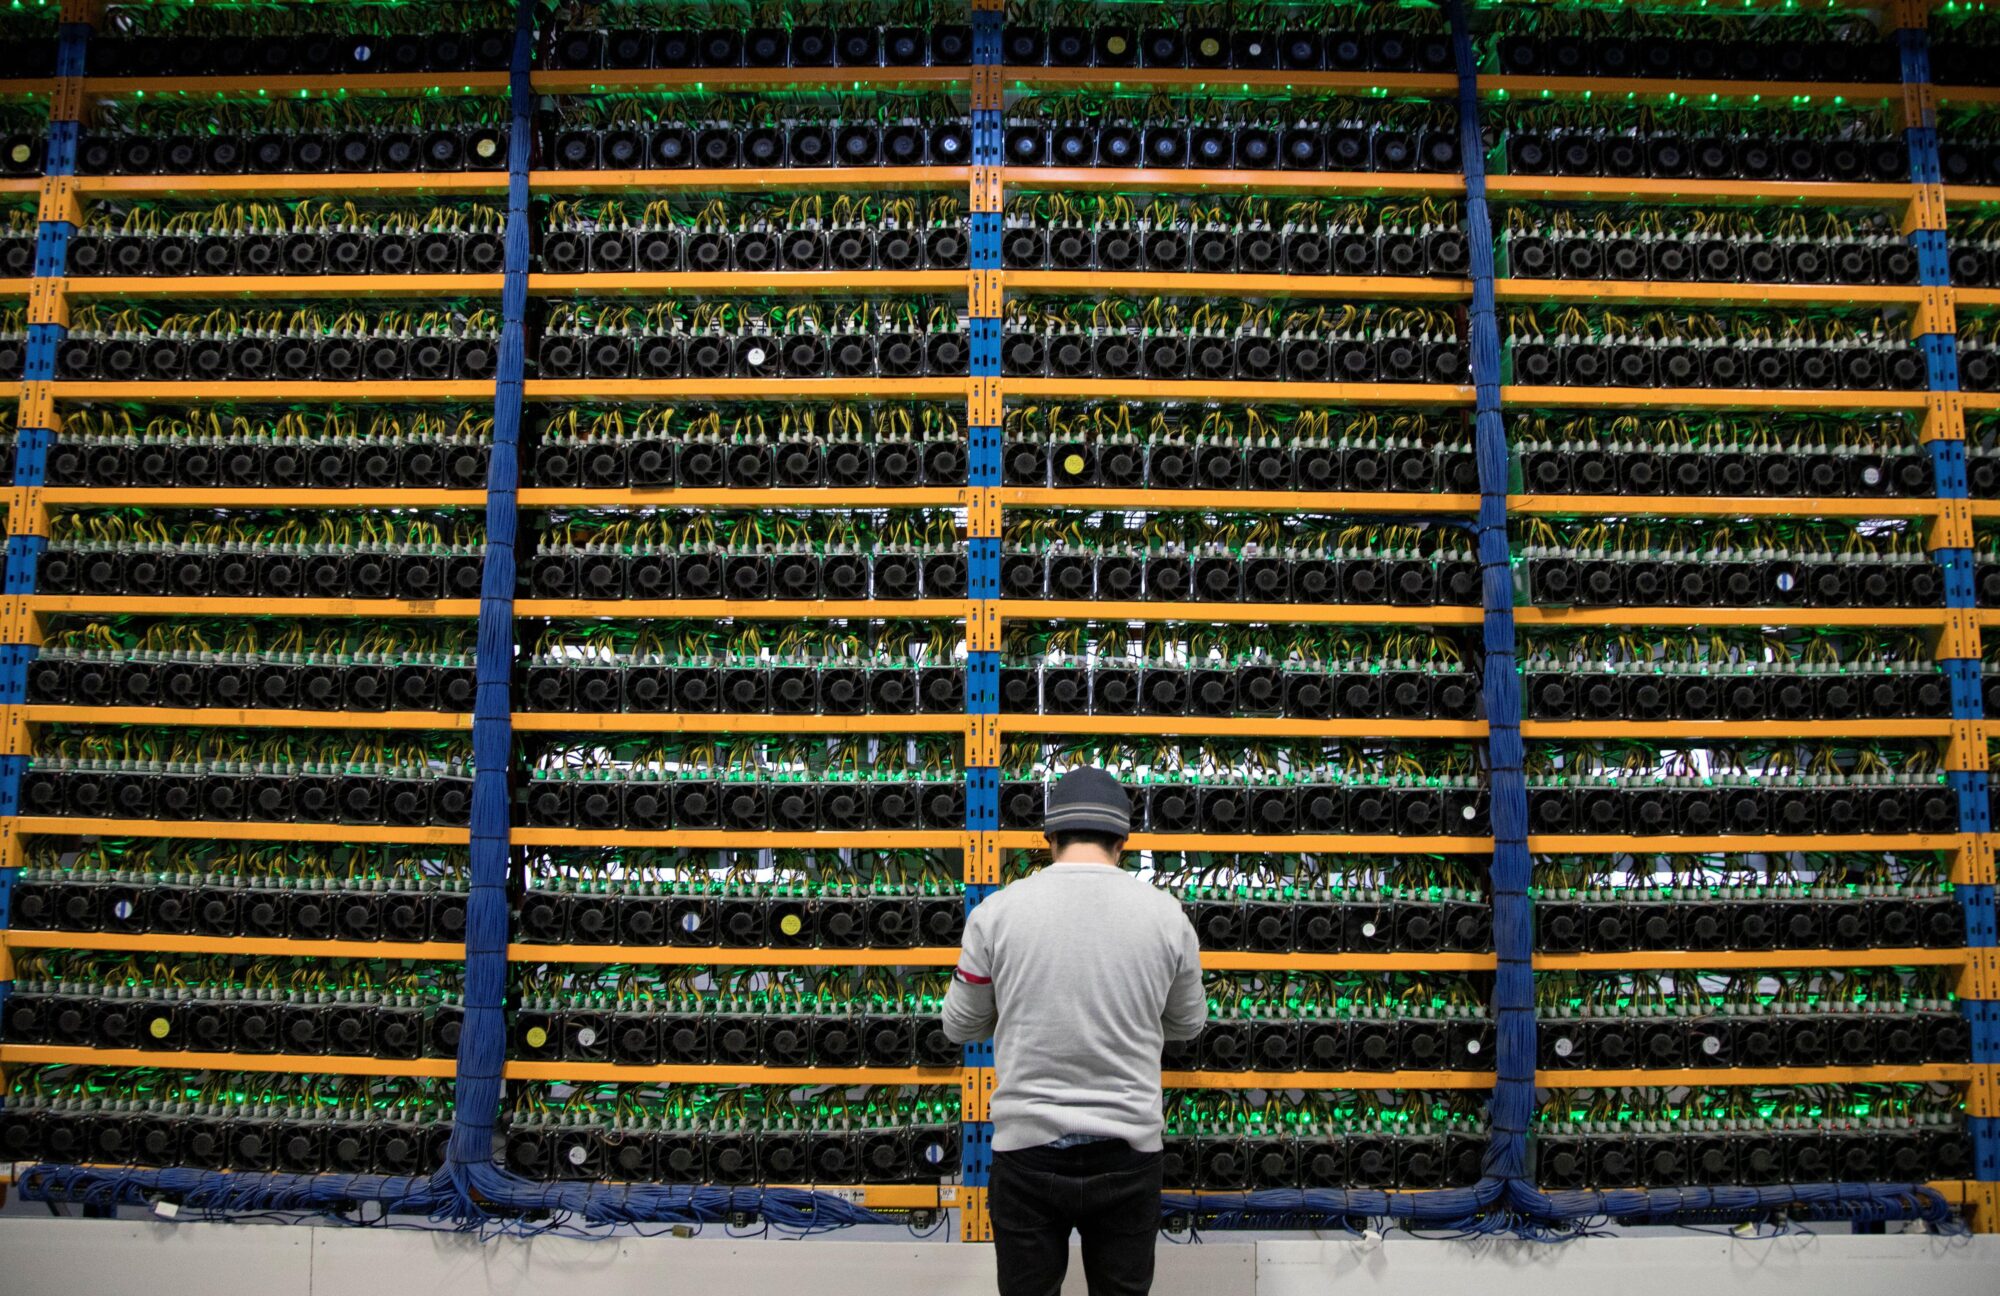 <p>A worker checks the fans at the cryptocurrency farming operation, Bitfarms, in Quebec, Canada (image: Alamy)</p>